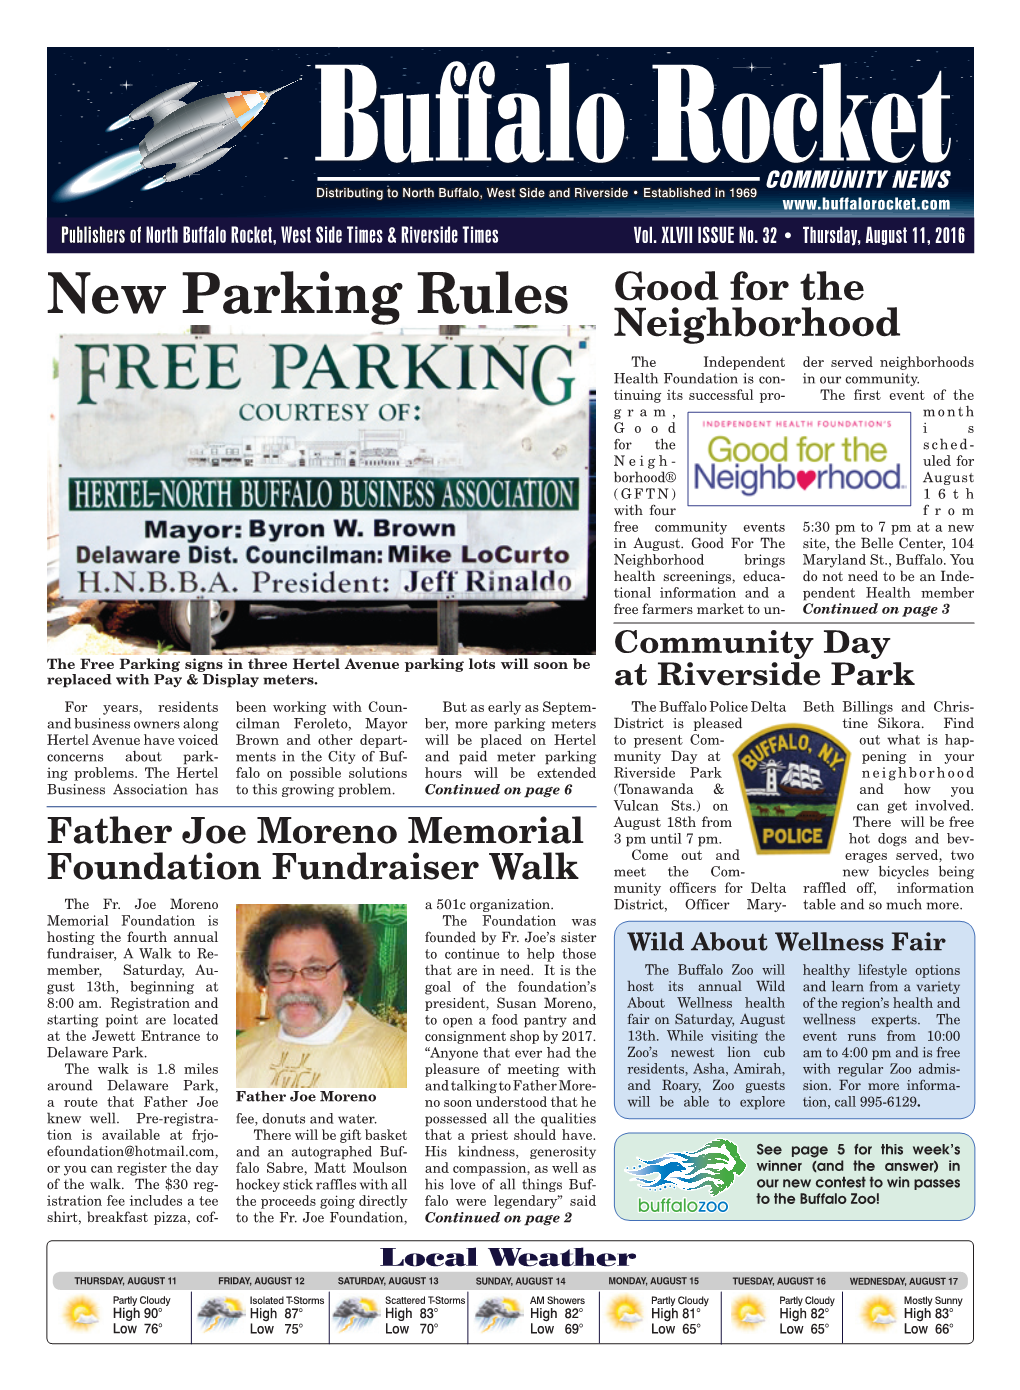 New Parking Rules Good for the Neighborhood the Independent Der Served Neighborhoods Health Foundation Is Con- in Our Community